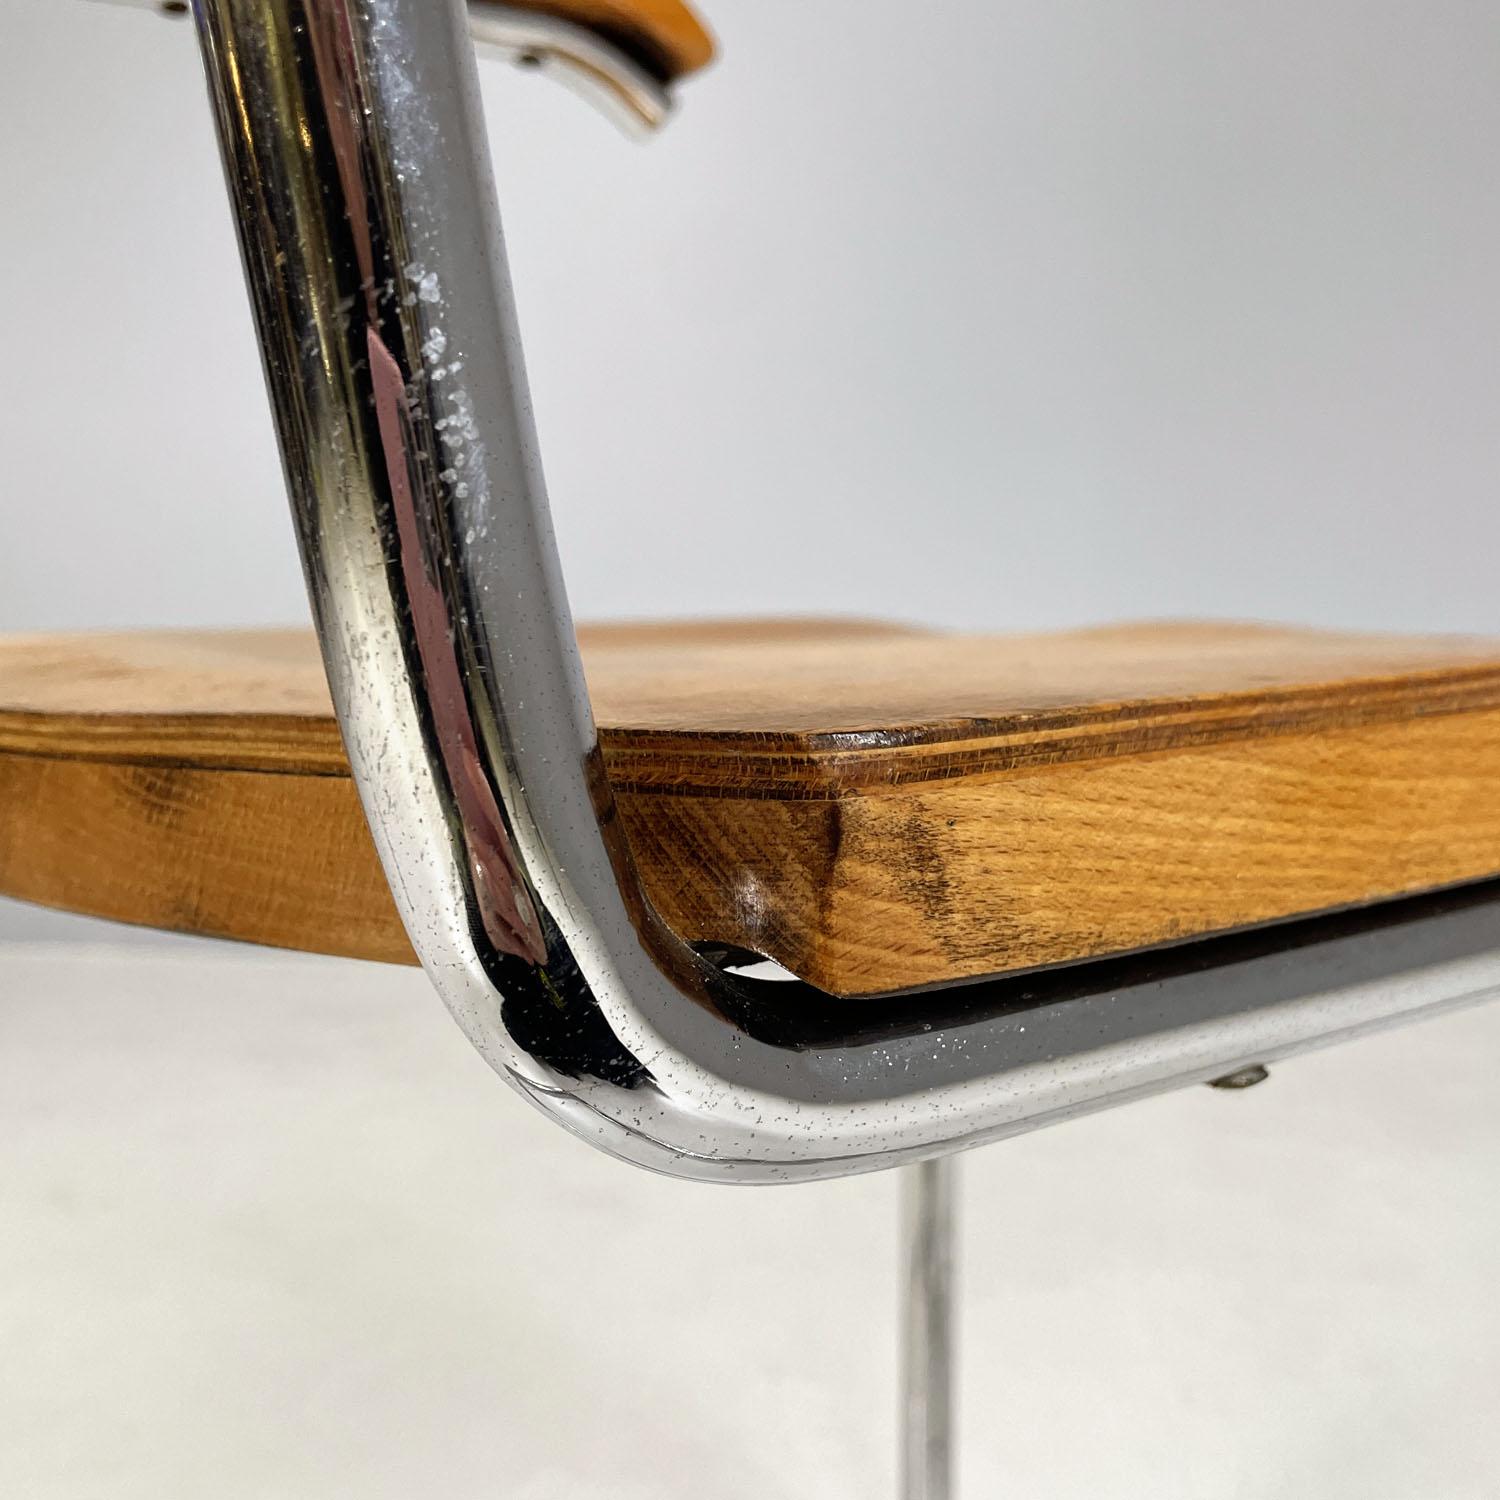 Czech Art Deco wood and chromed steel chair with armrests by Ladislav Zak, 1930s For Sale 6